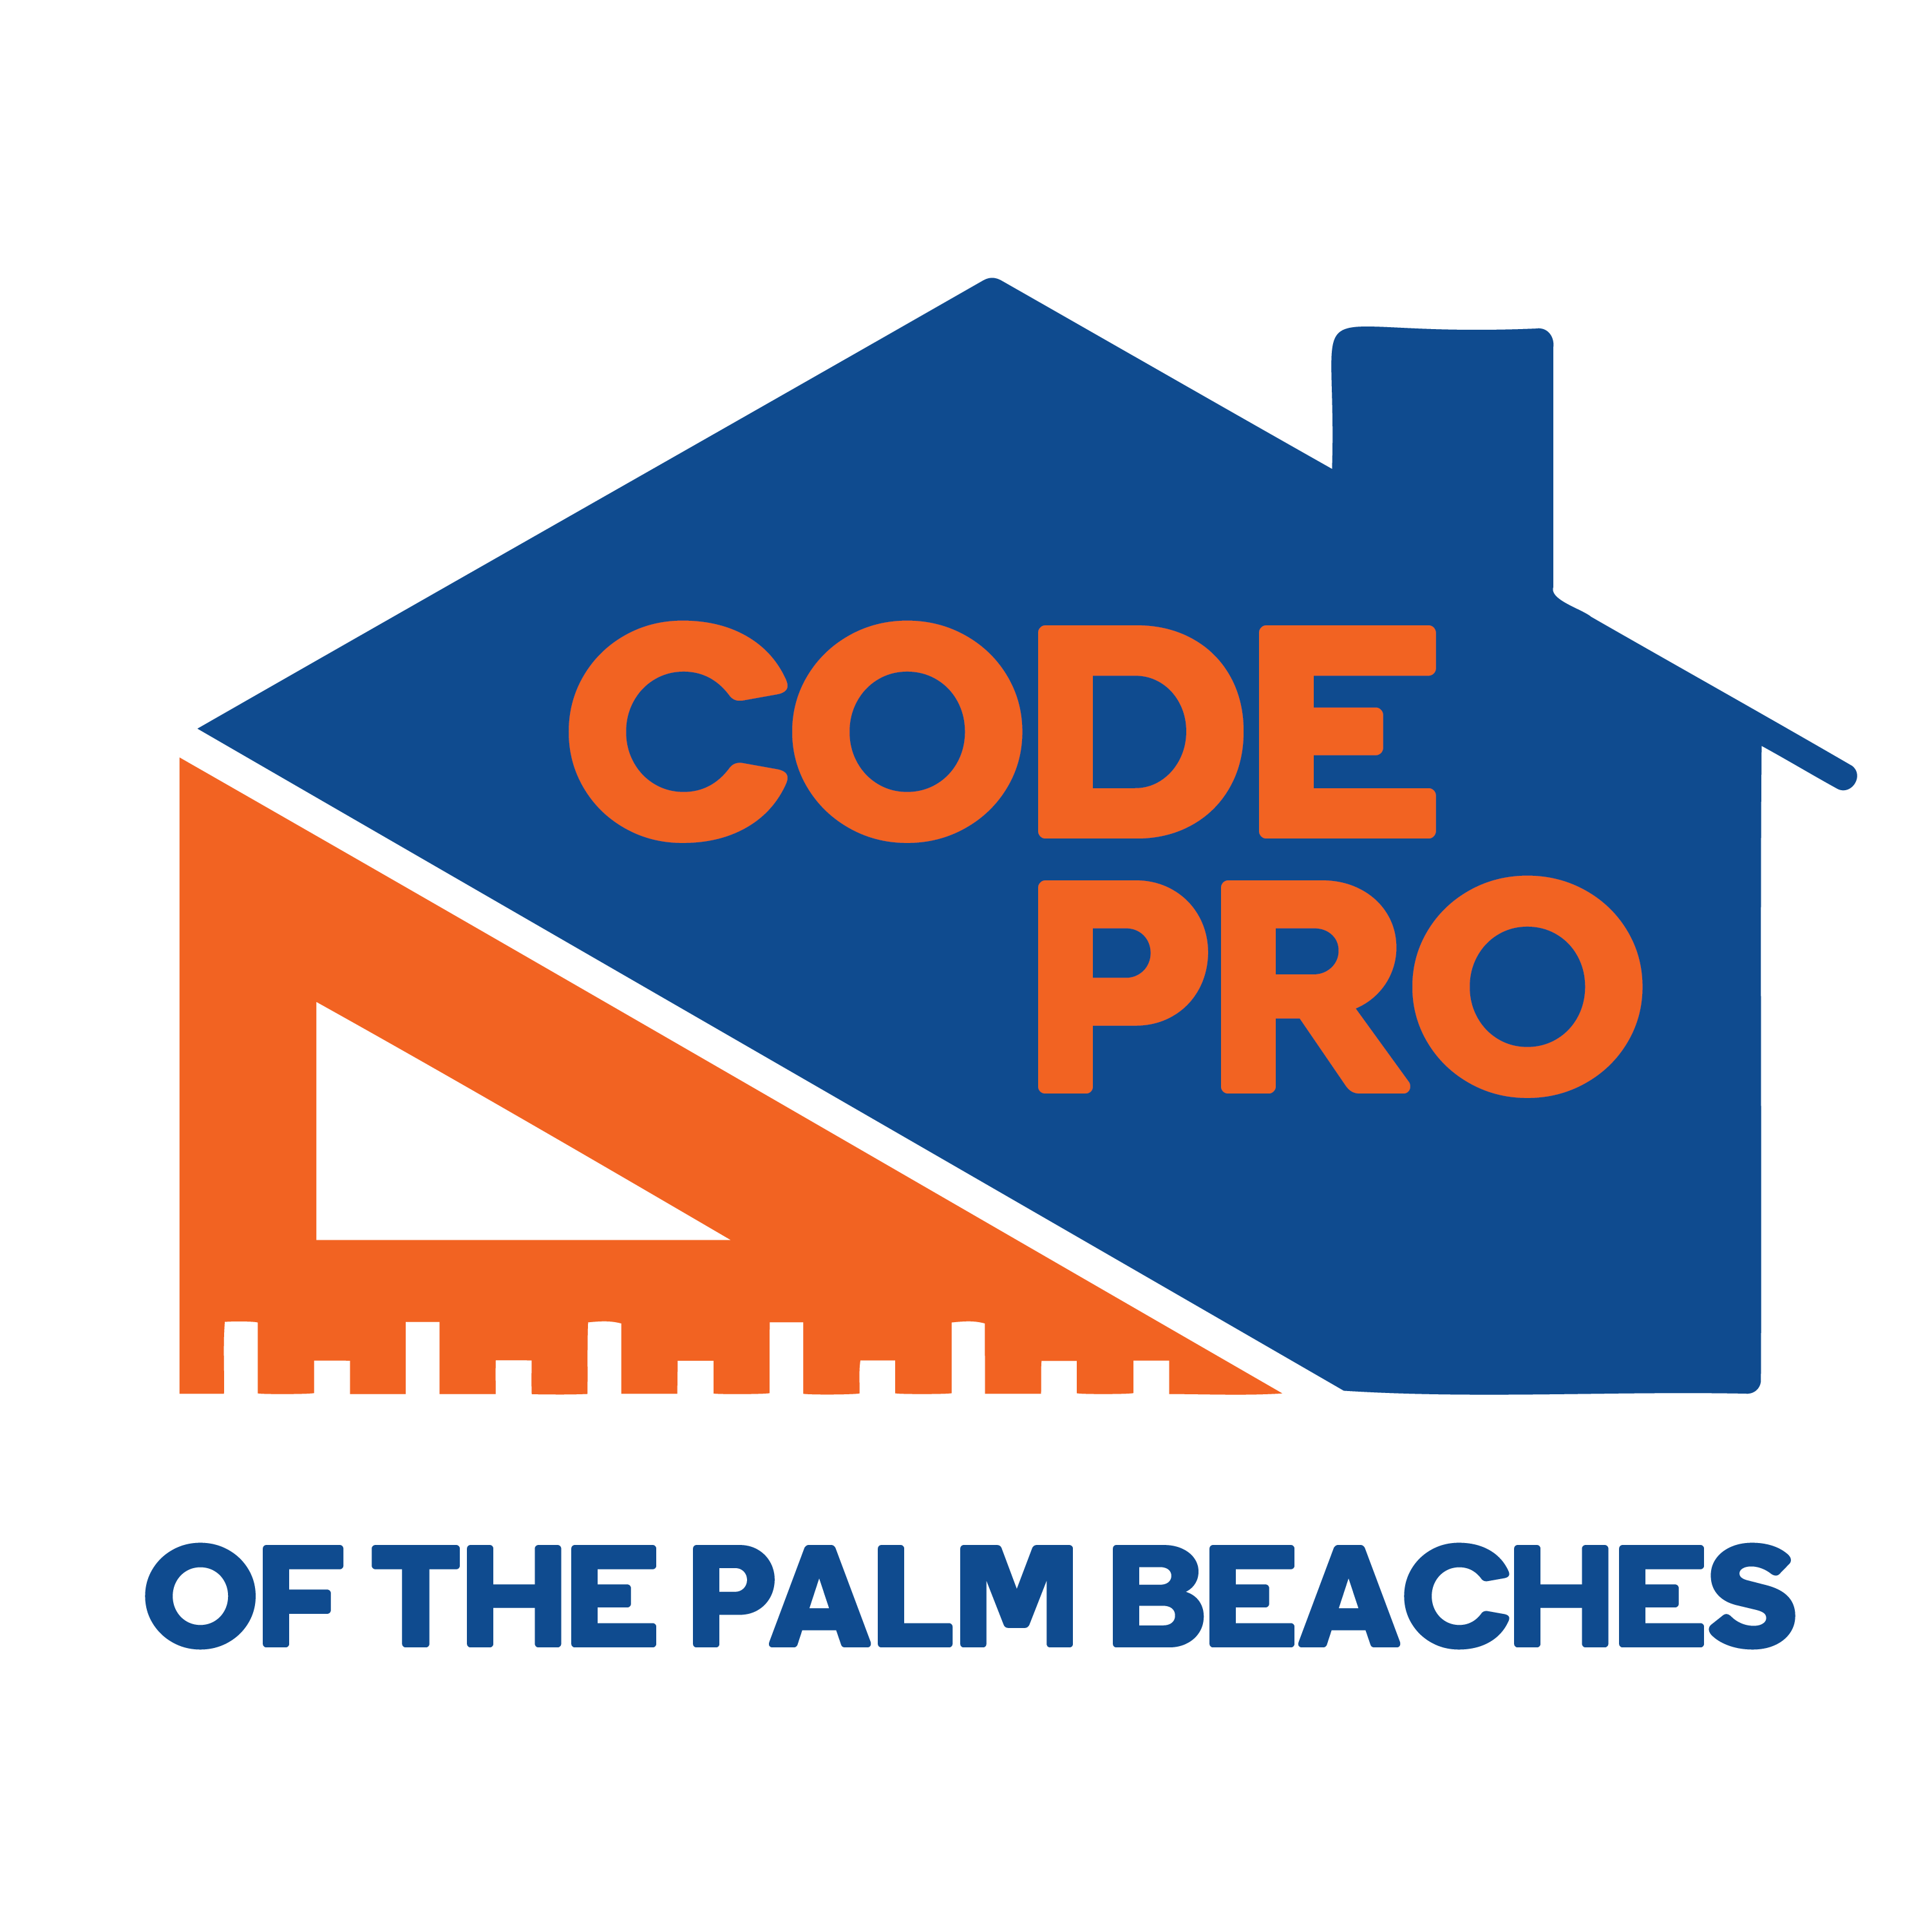 Code Pro of the Palm Beaches